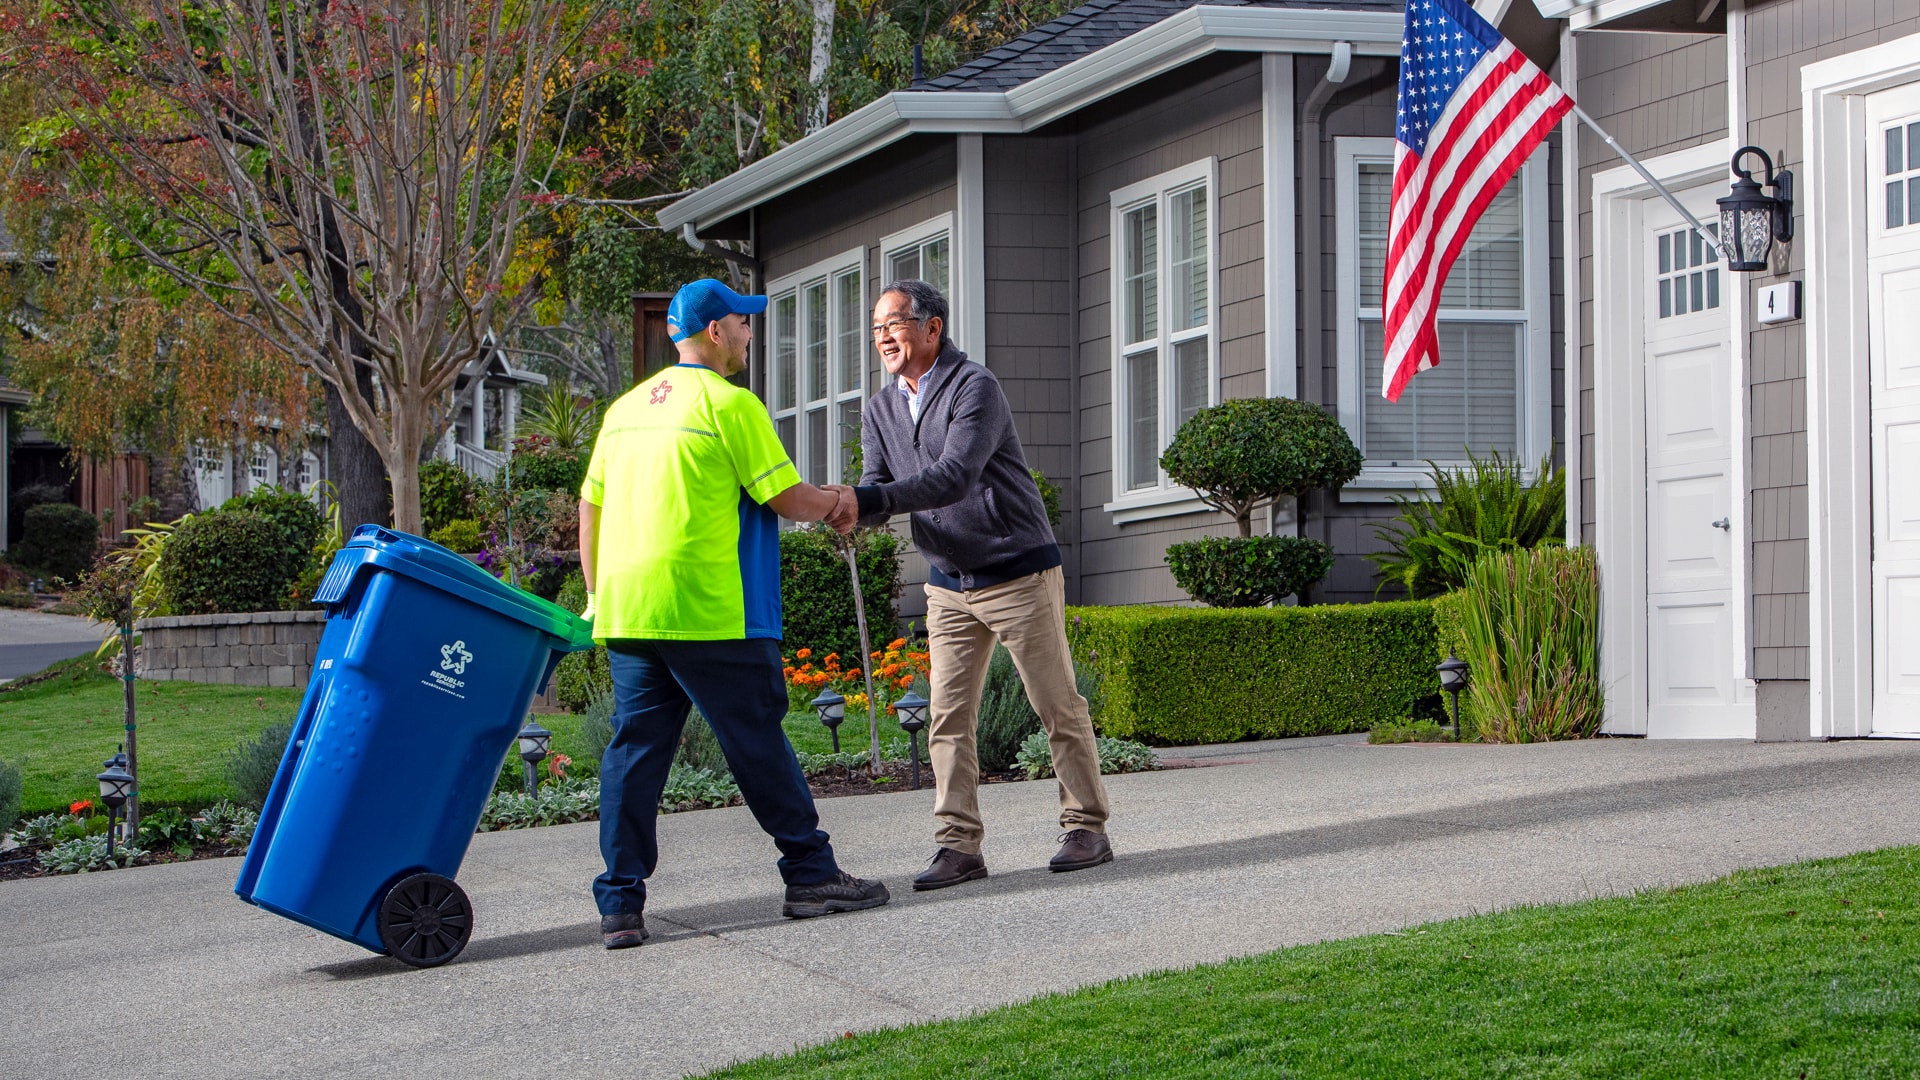 A Republic Services Employee in a bright yellow shirt rolls a blue recycling pail with the Republic Services Logo up a homeowners driveway.